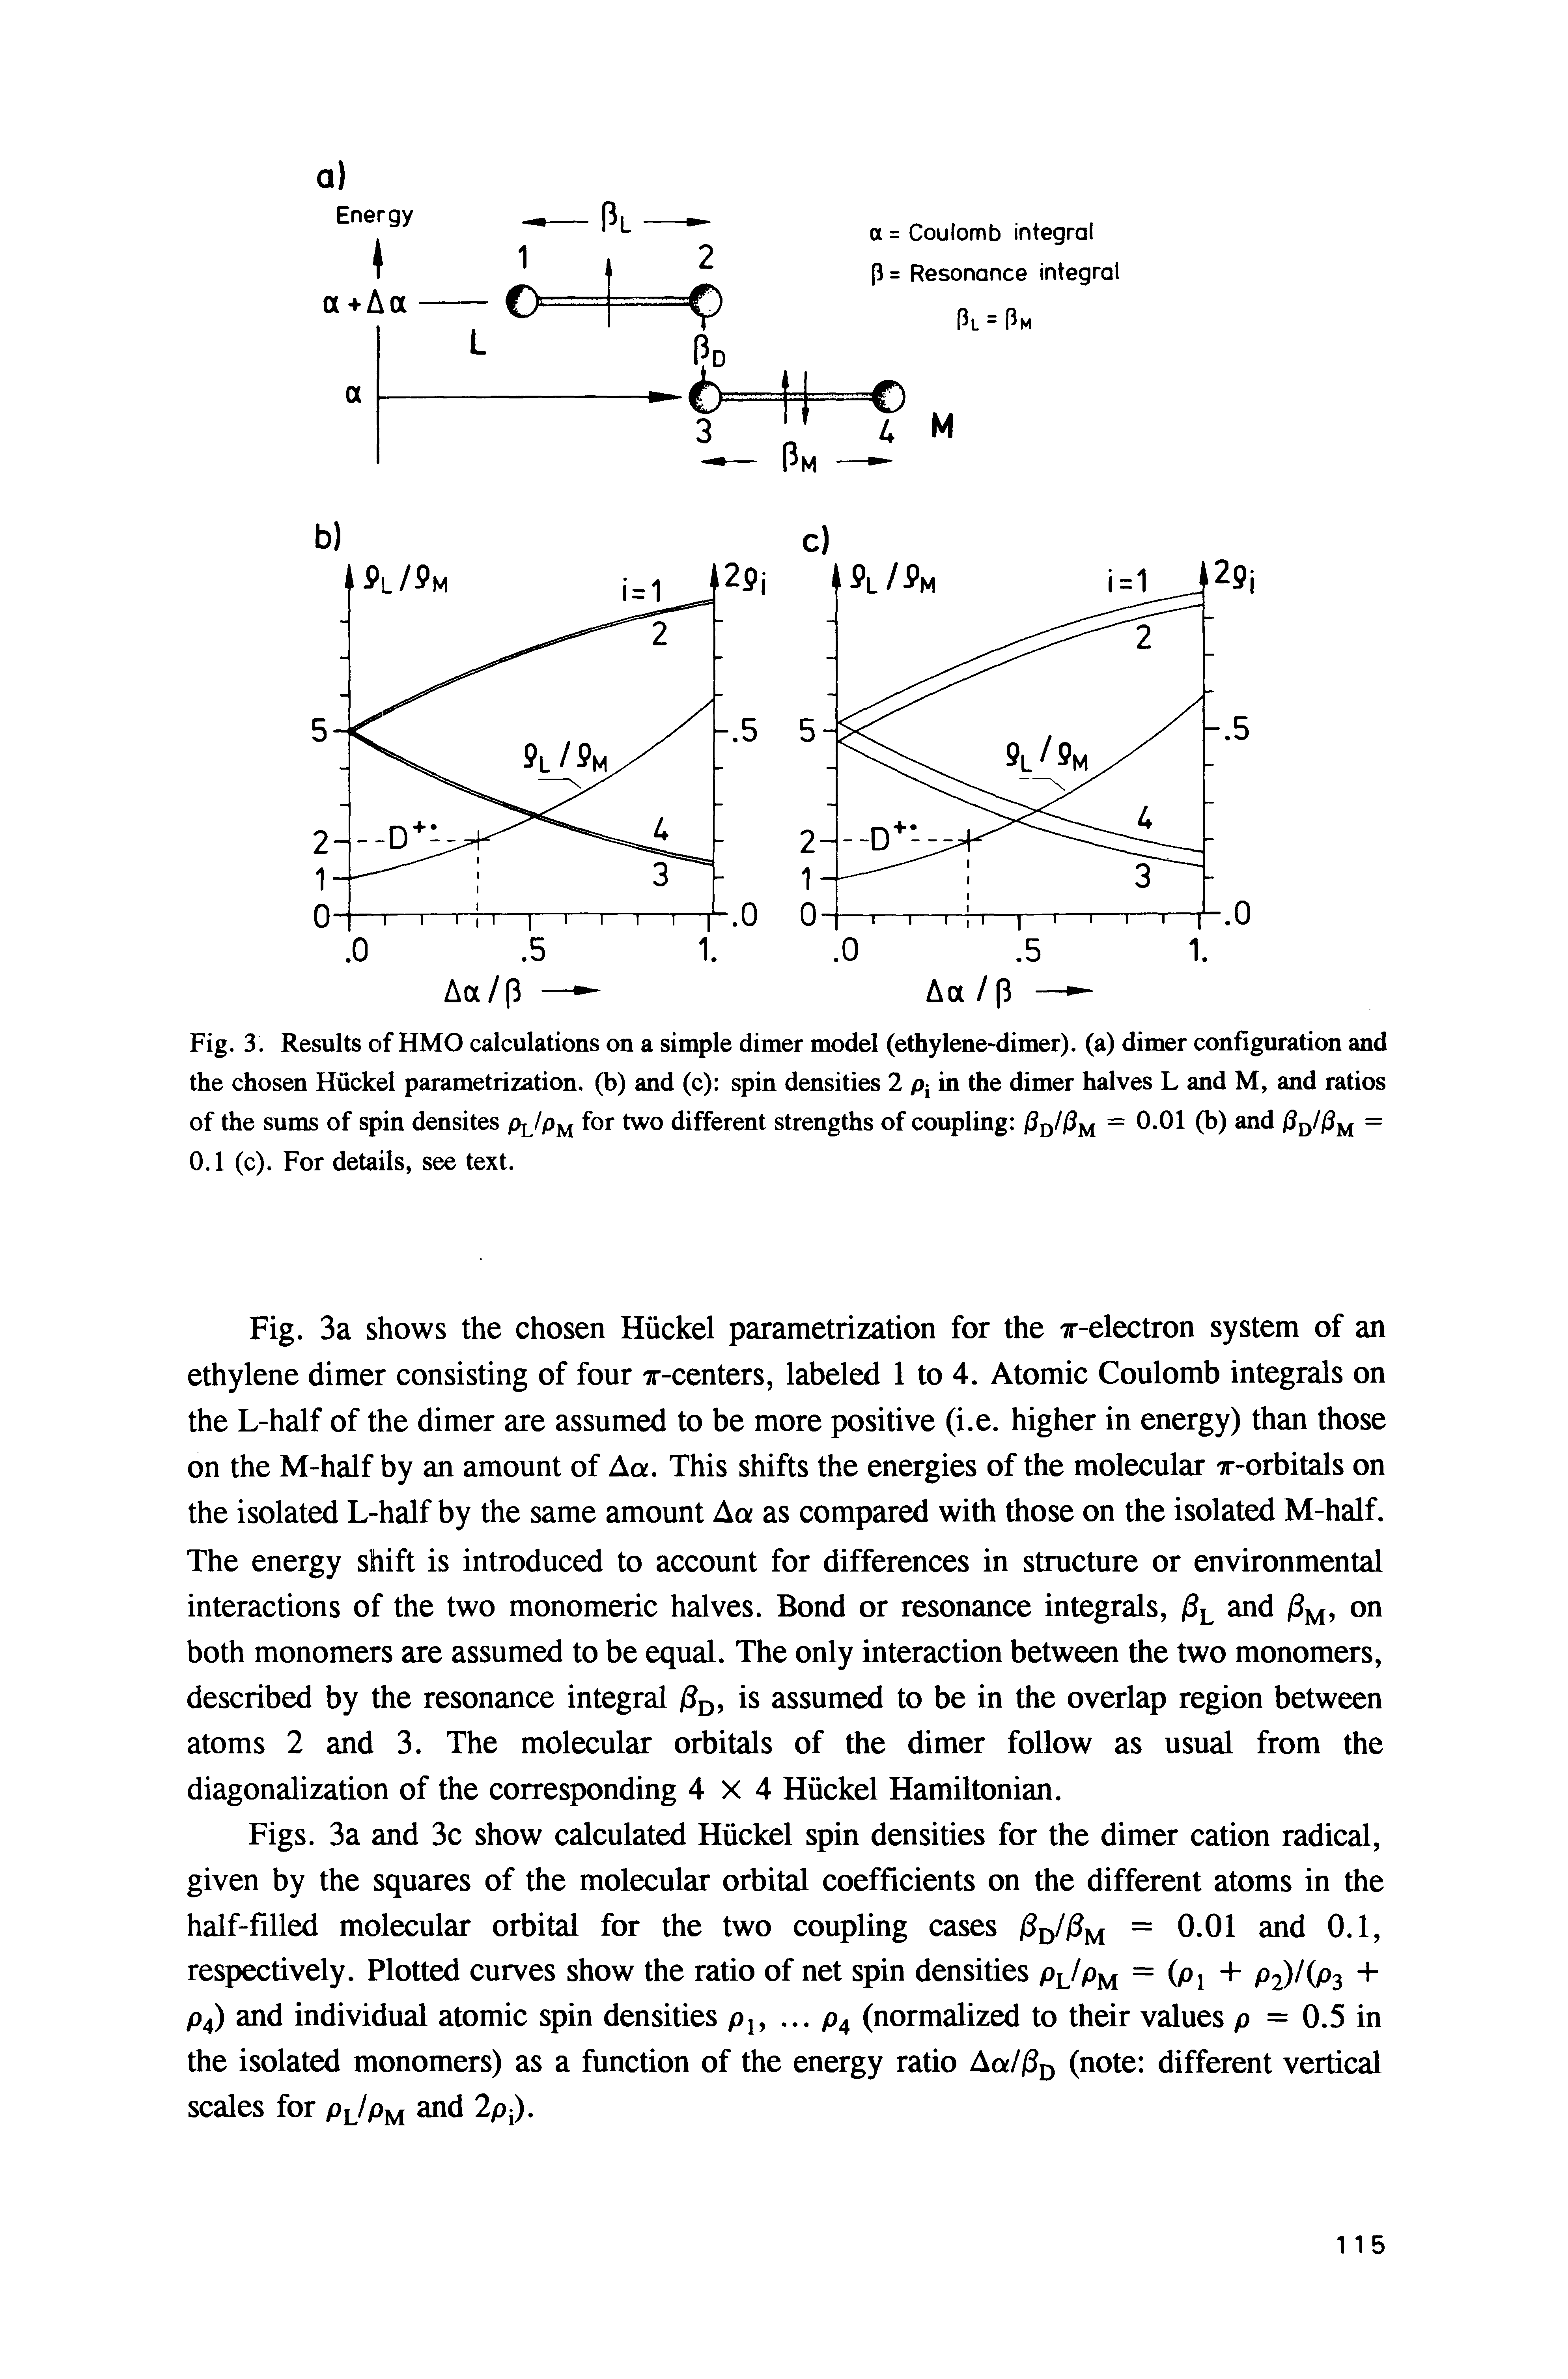 Fig. 3. Results of HMO calculations on a simple dimer model (ethylene-dimer), (a) dimer configuration and the chosen Huckel parametrization. (b) and (c) spin densities 2 in the dimer halves L and M, and ratios of the sums of spin densites Pl/p for two different strengths of coupling = 0.01 (b) and =...